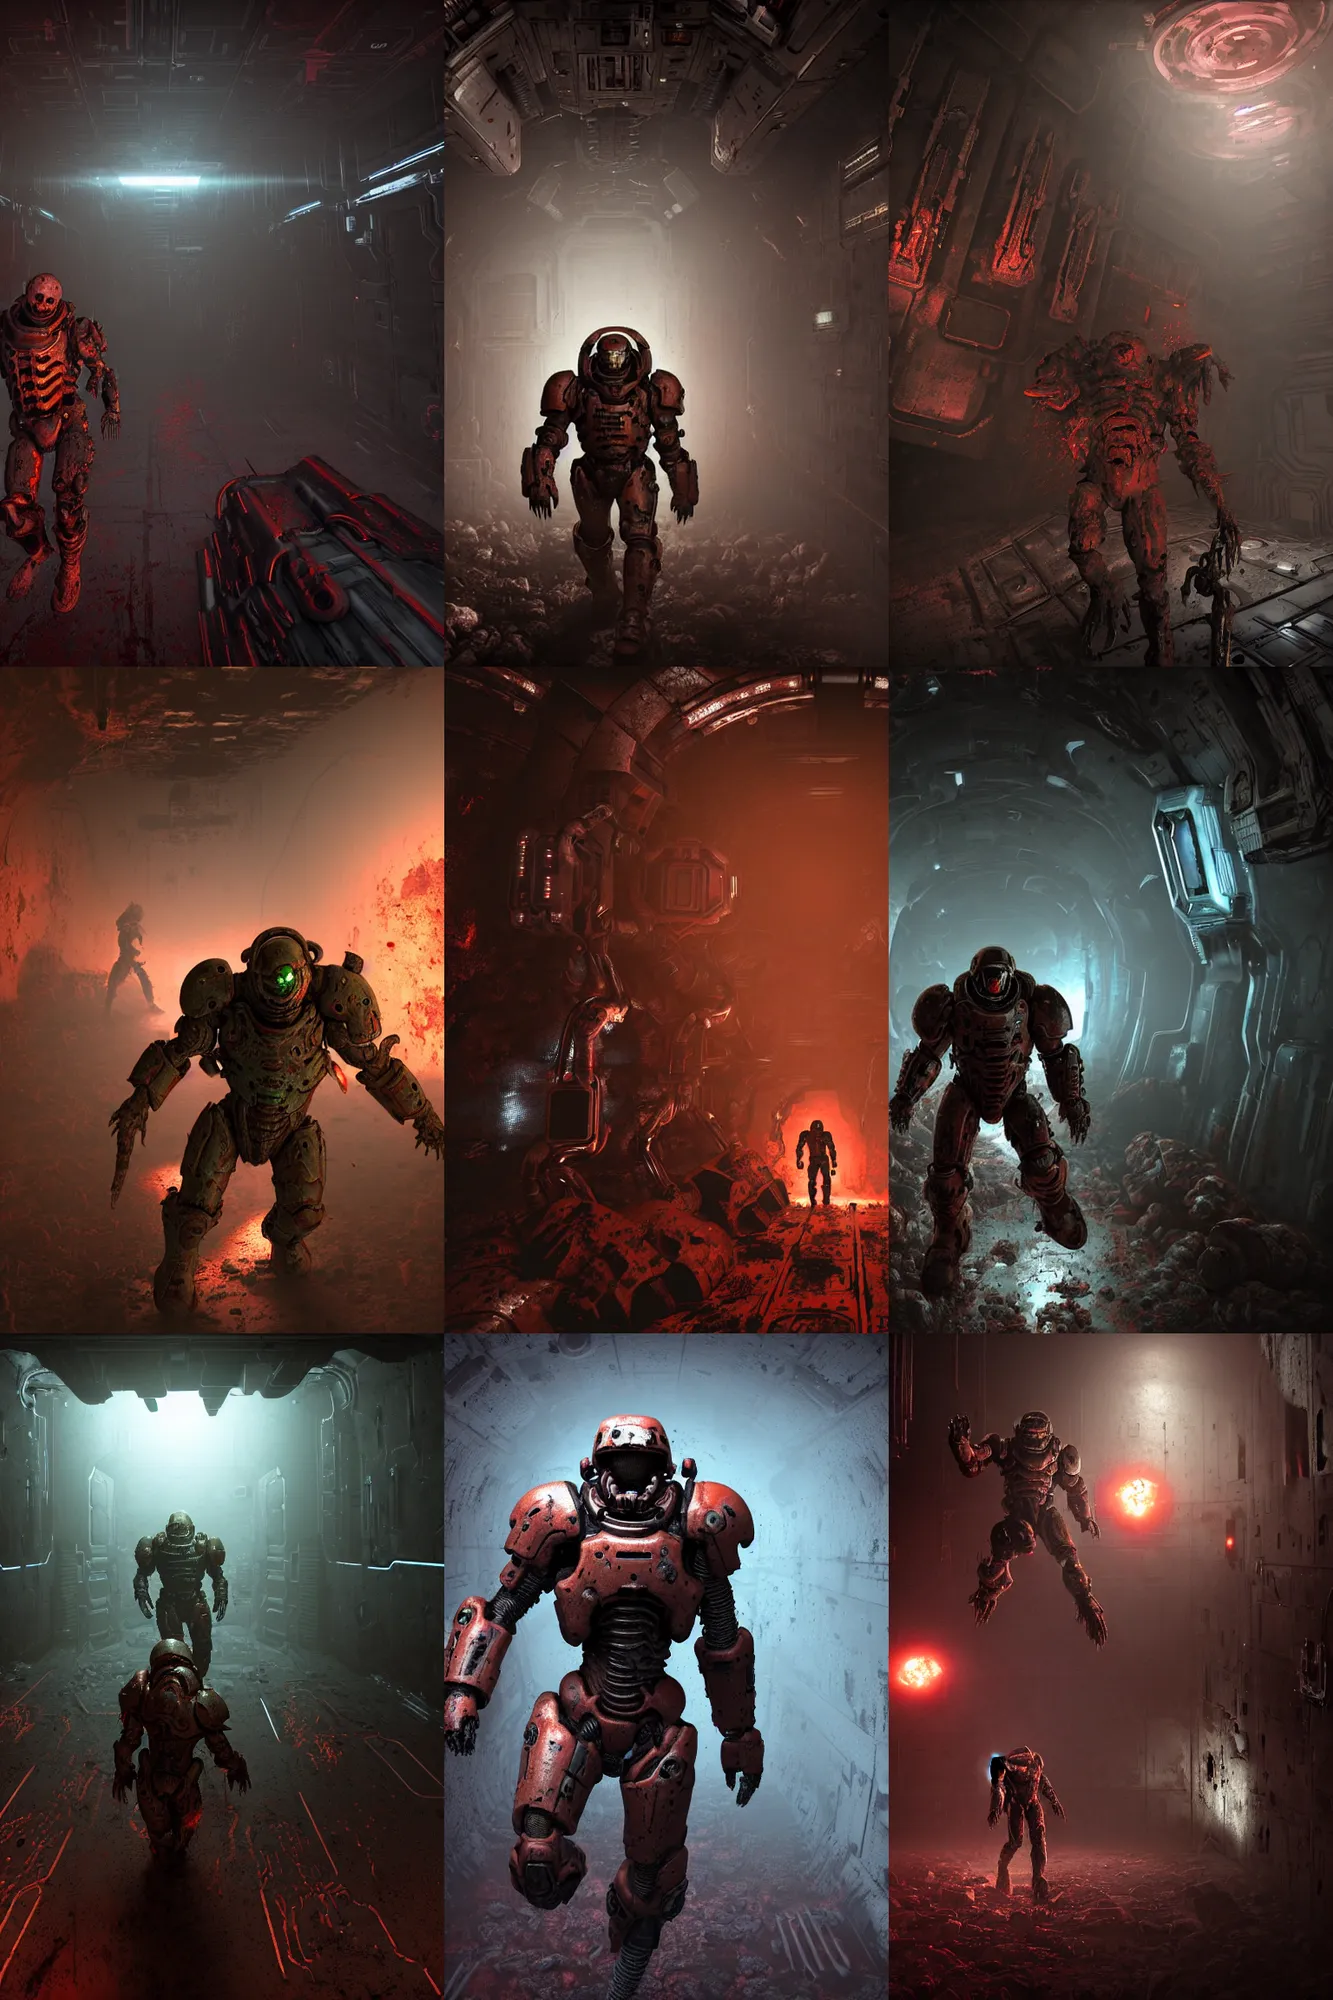 Prompt: horror movie scene of an individual in doom slayer armor running in a desolate deep space mining station, rusty metal walls, broken pipes, full body character portrait, dark colors, muted colors, tense atmosphere, mist floats in the air, amazing value control, dead space, moody colors, dramatic lighting, ussg ishimura, frank frazetta